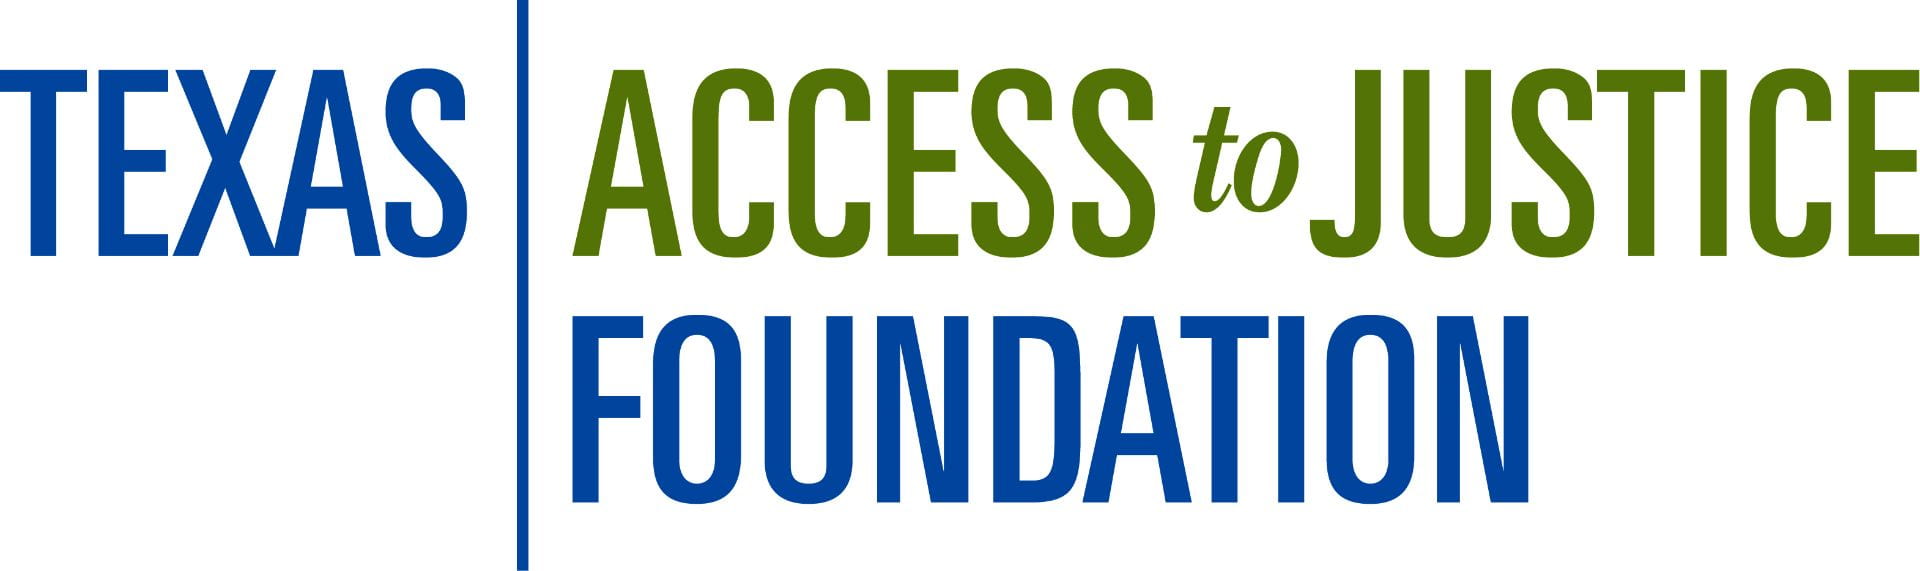 Texas Access to Justice Foundation